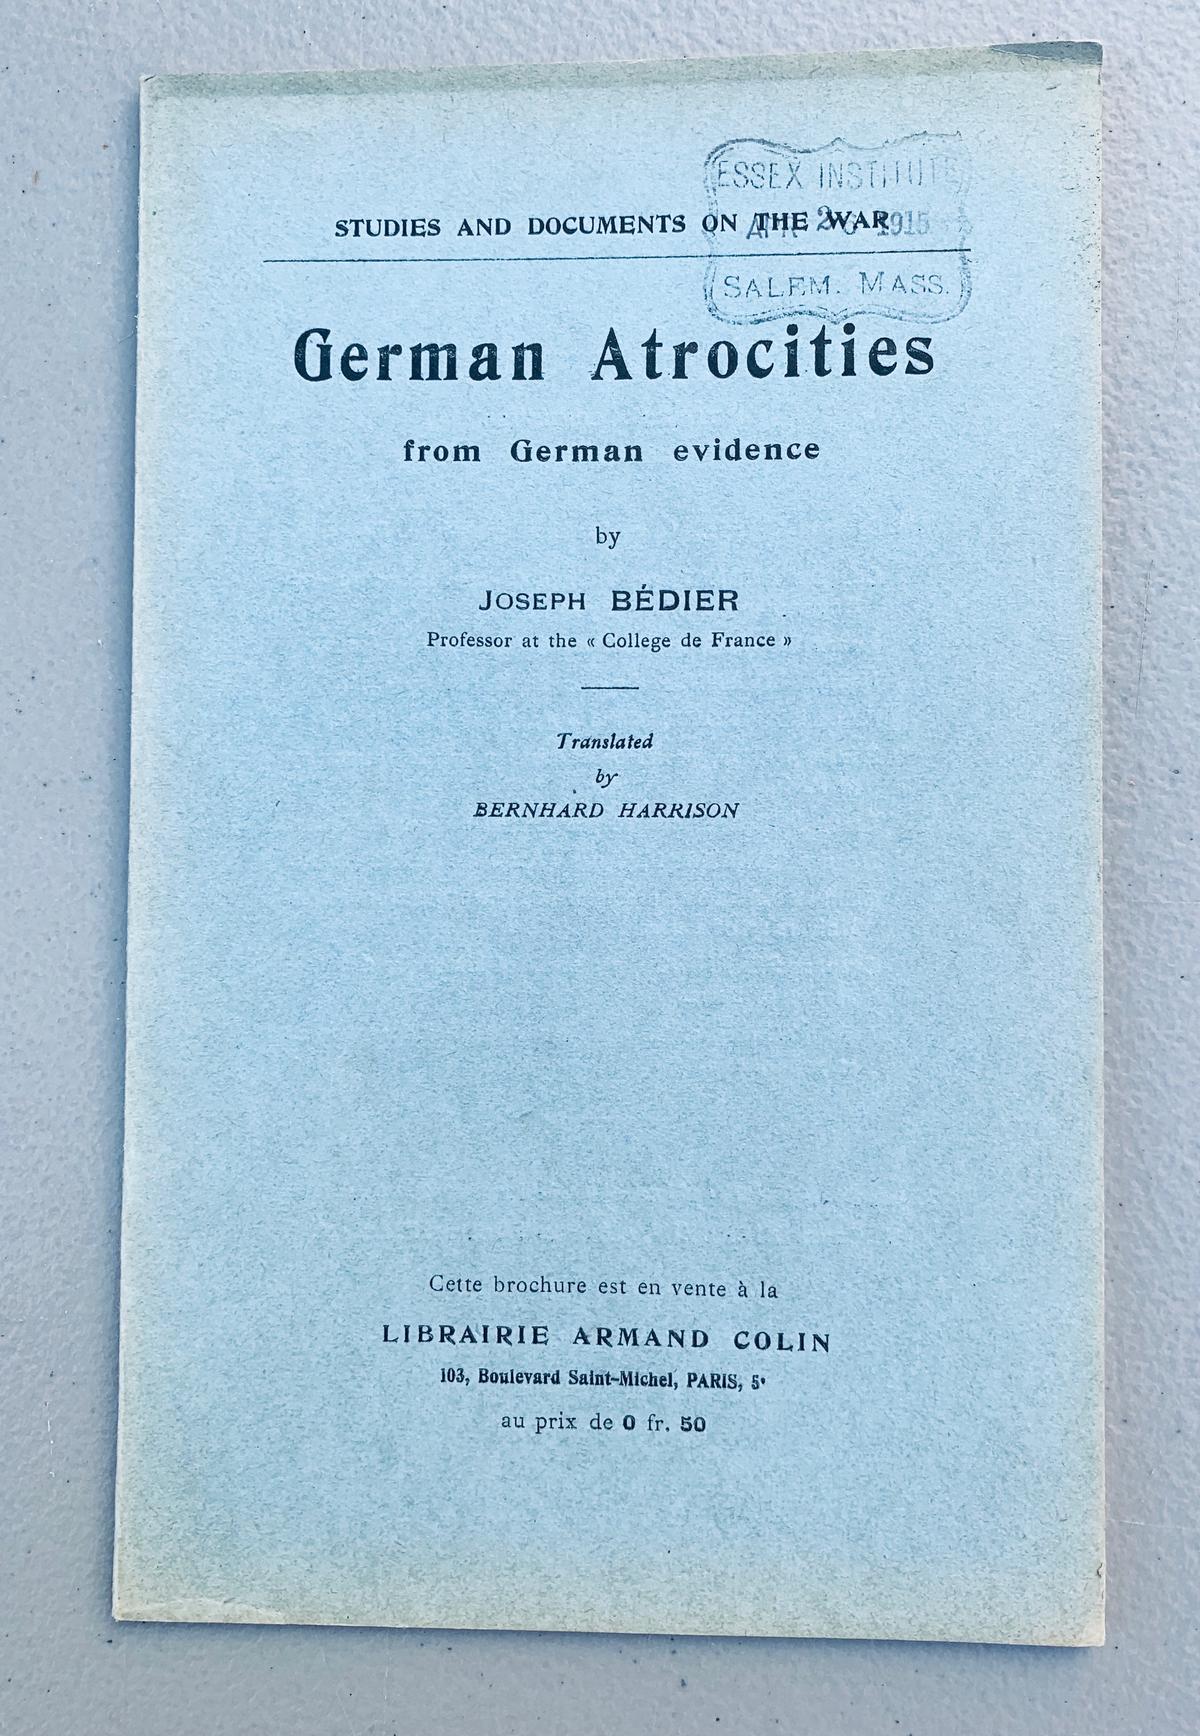 WW1 PAMPHLET Germany Atrocities from German Evidence (c.1916)